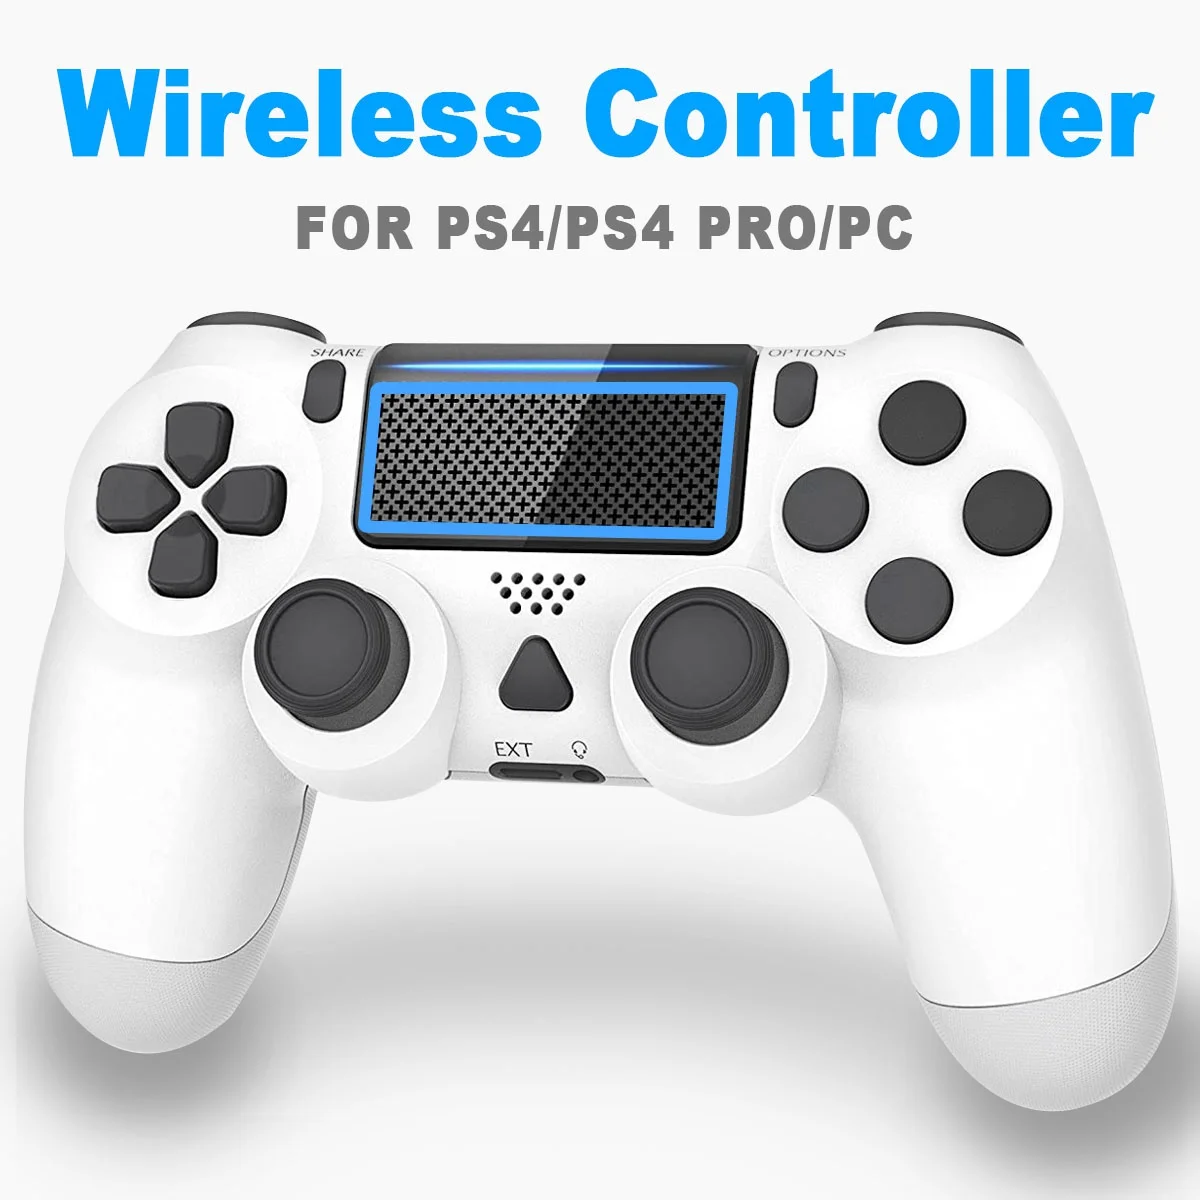 Wireless Bluetooth Controller For SONY PS4 Gamepad For Play Station 4 Joystick Wireless Console 5 Colors For Dualshock Controle